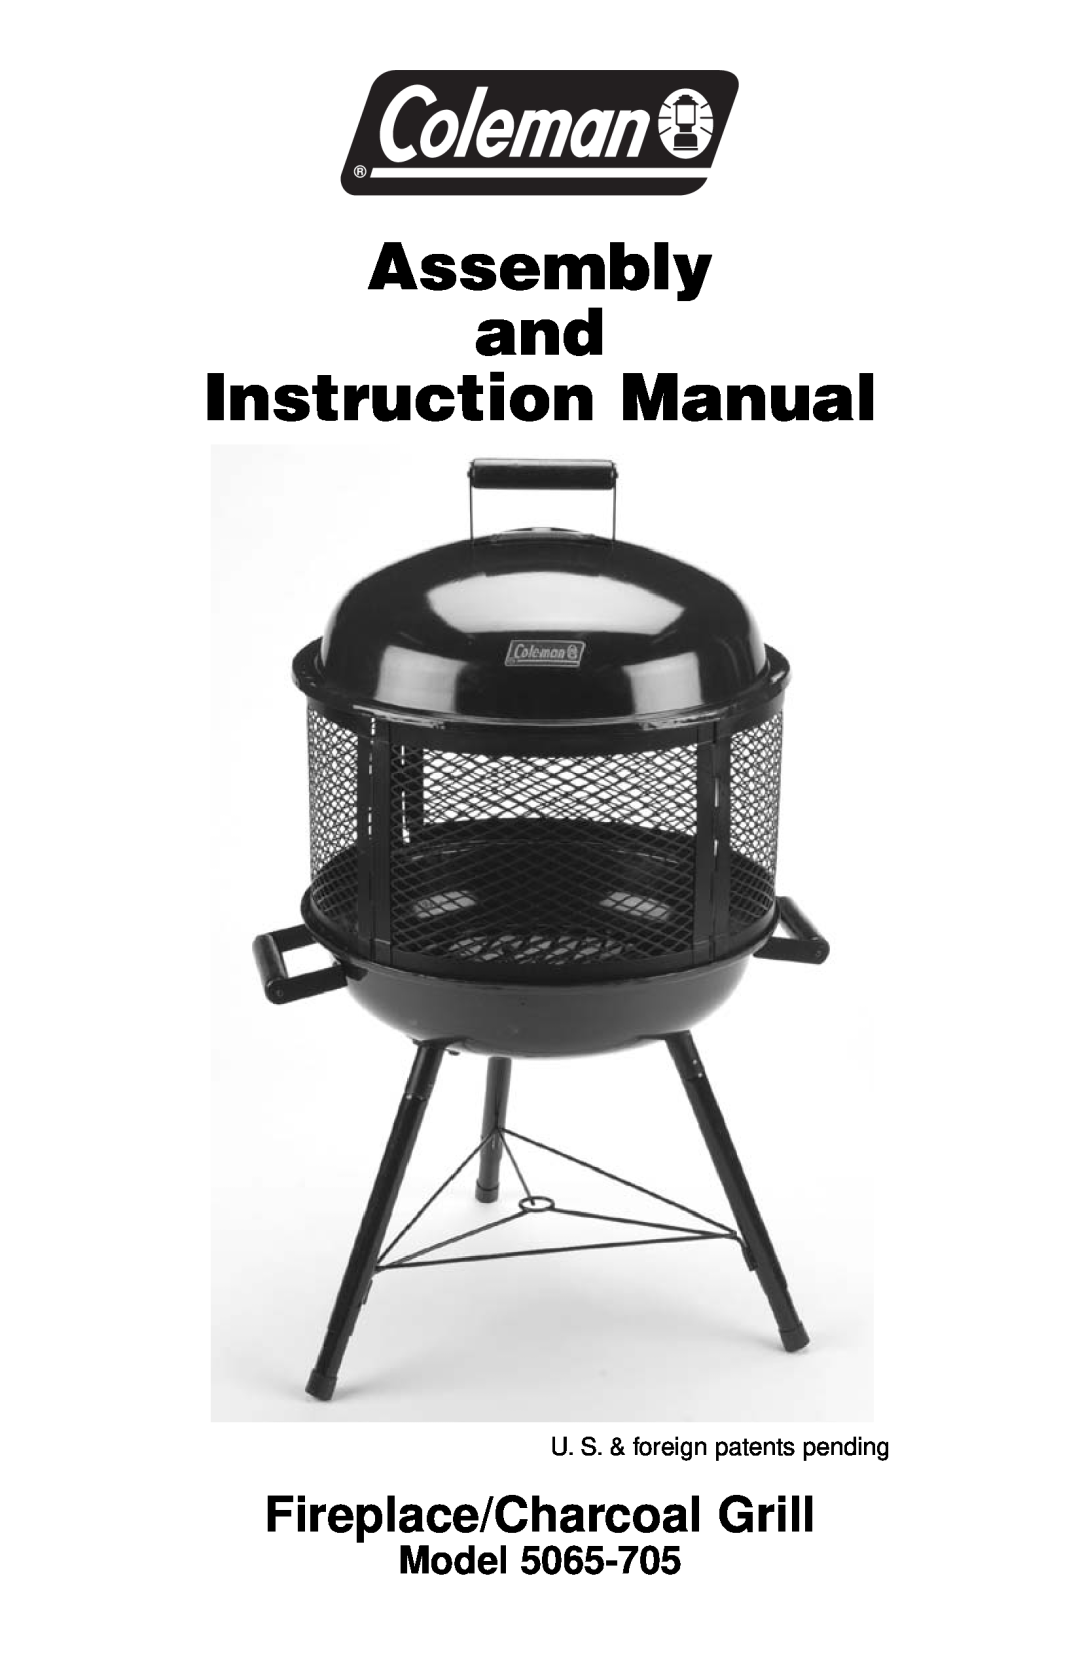 Coleman 5065-705 instruction manual Fireplace/Charcoal Grill, Assembly and Instruction Manual, Model 